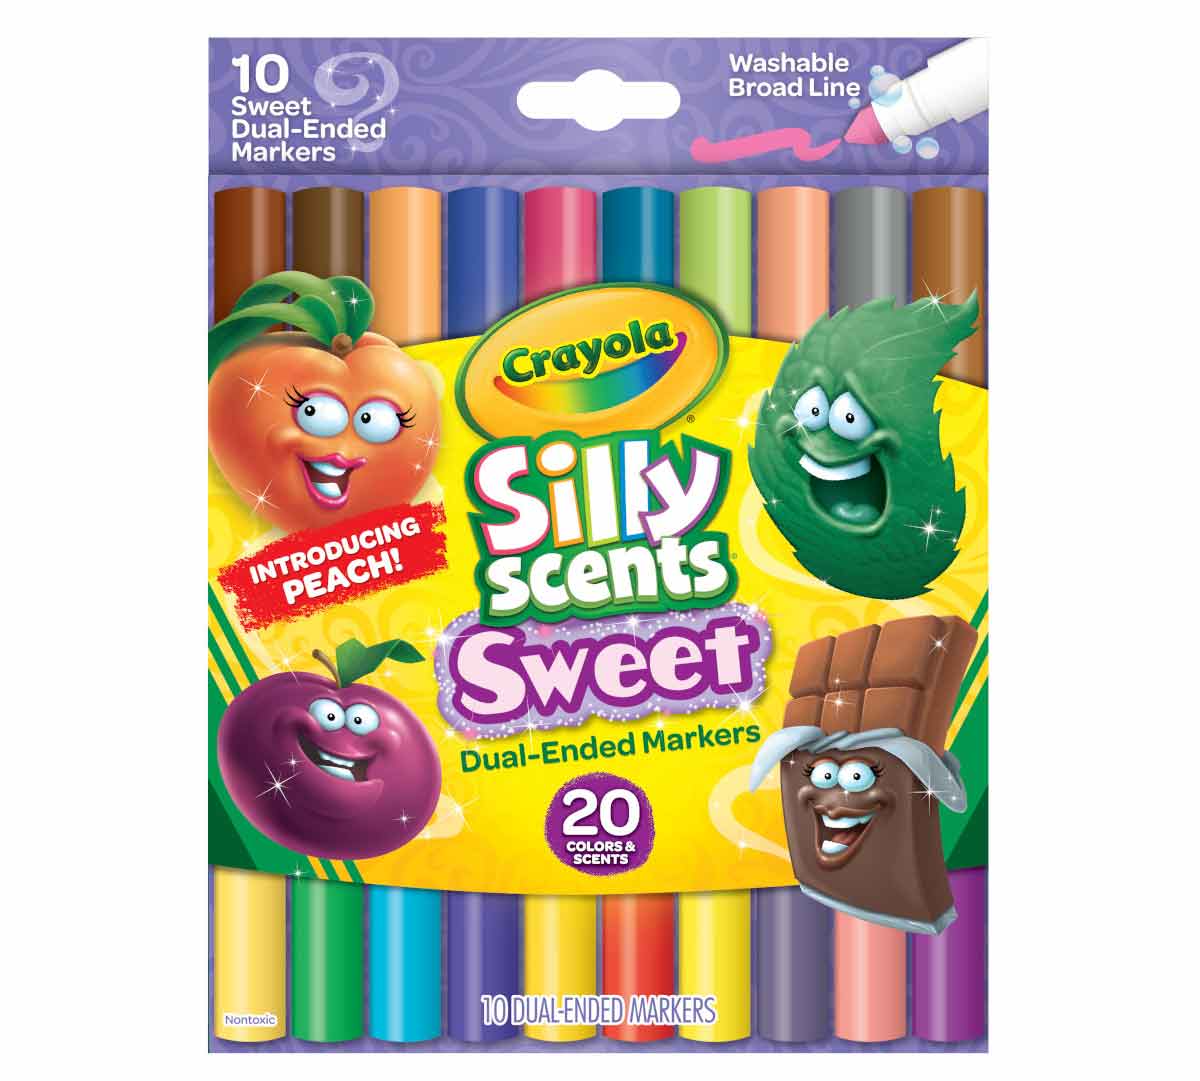 https://shop.crayola.com/on/demandware.static/-/Sites-crayola-storefront/default/dwbabcb607/images/58-8339-0-202_10ct-Silly-Scents-Dual-Ended-Markers_Peach_F-R.jpg